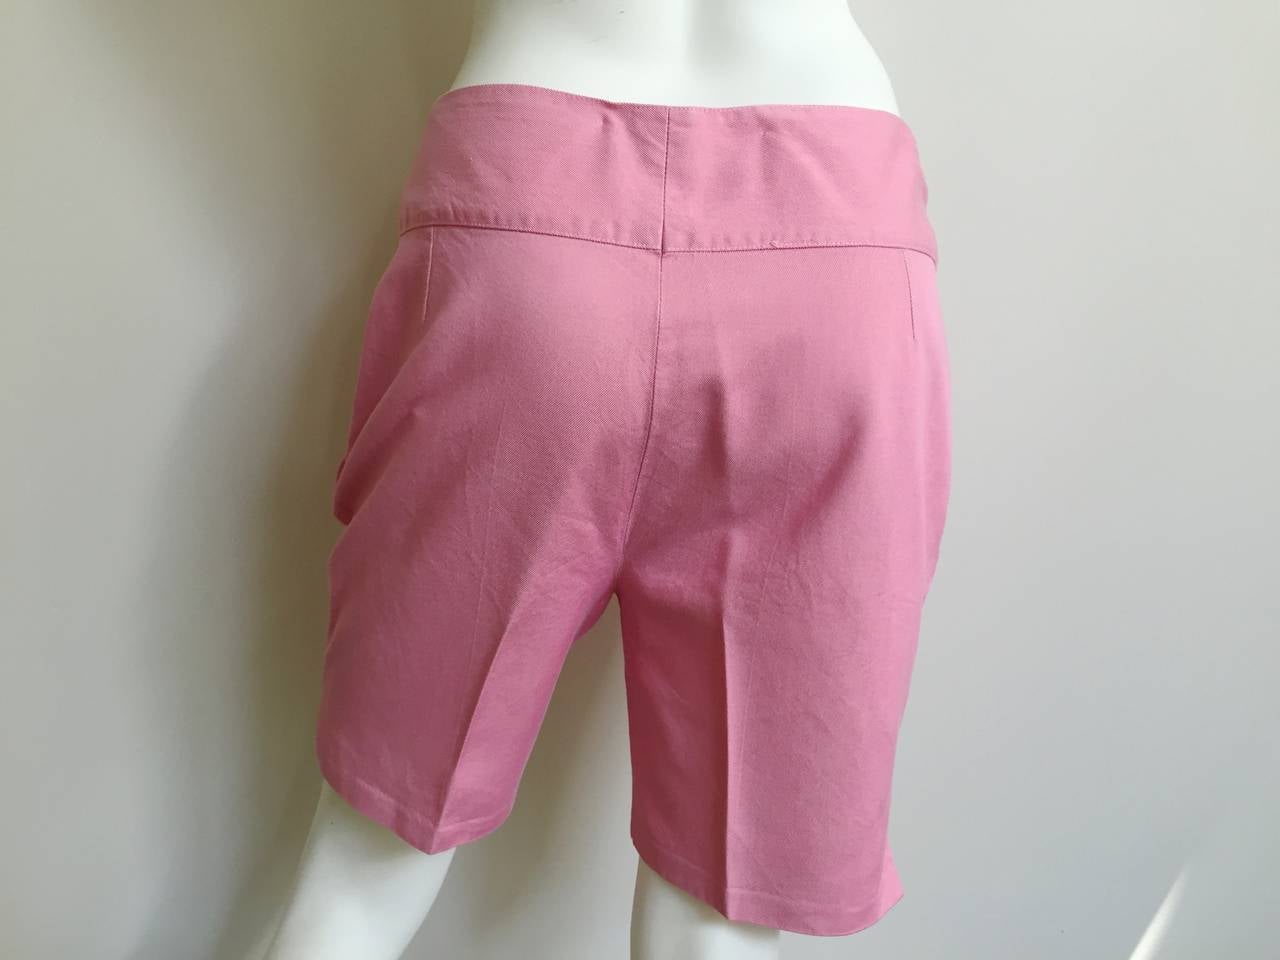 Thierry Mugler Couture Denim Shorts Size 10. For Sale at 1stdibs